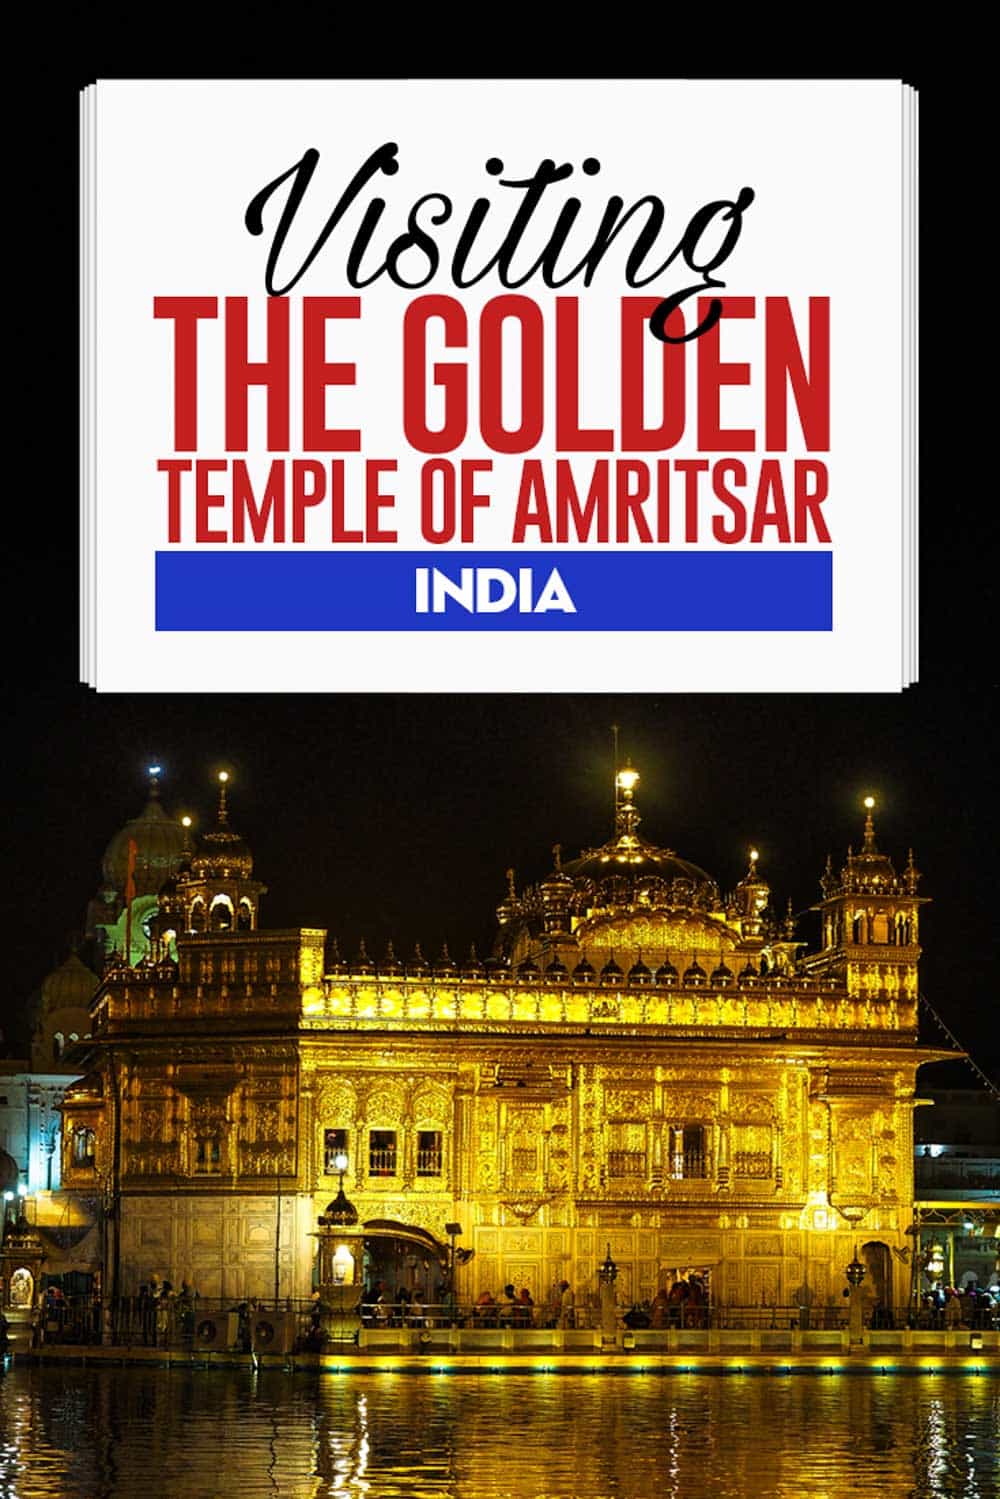 Travel guide to the Golden temple travels Amritsar in India Punjab